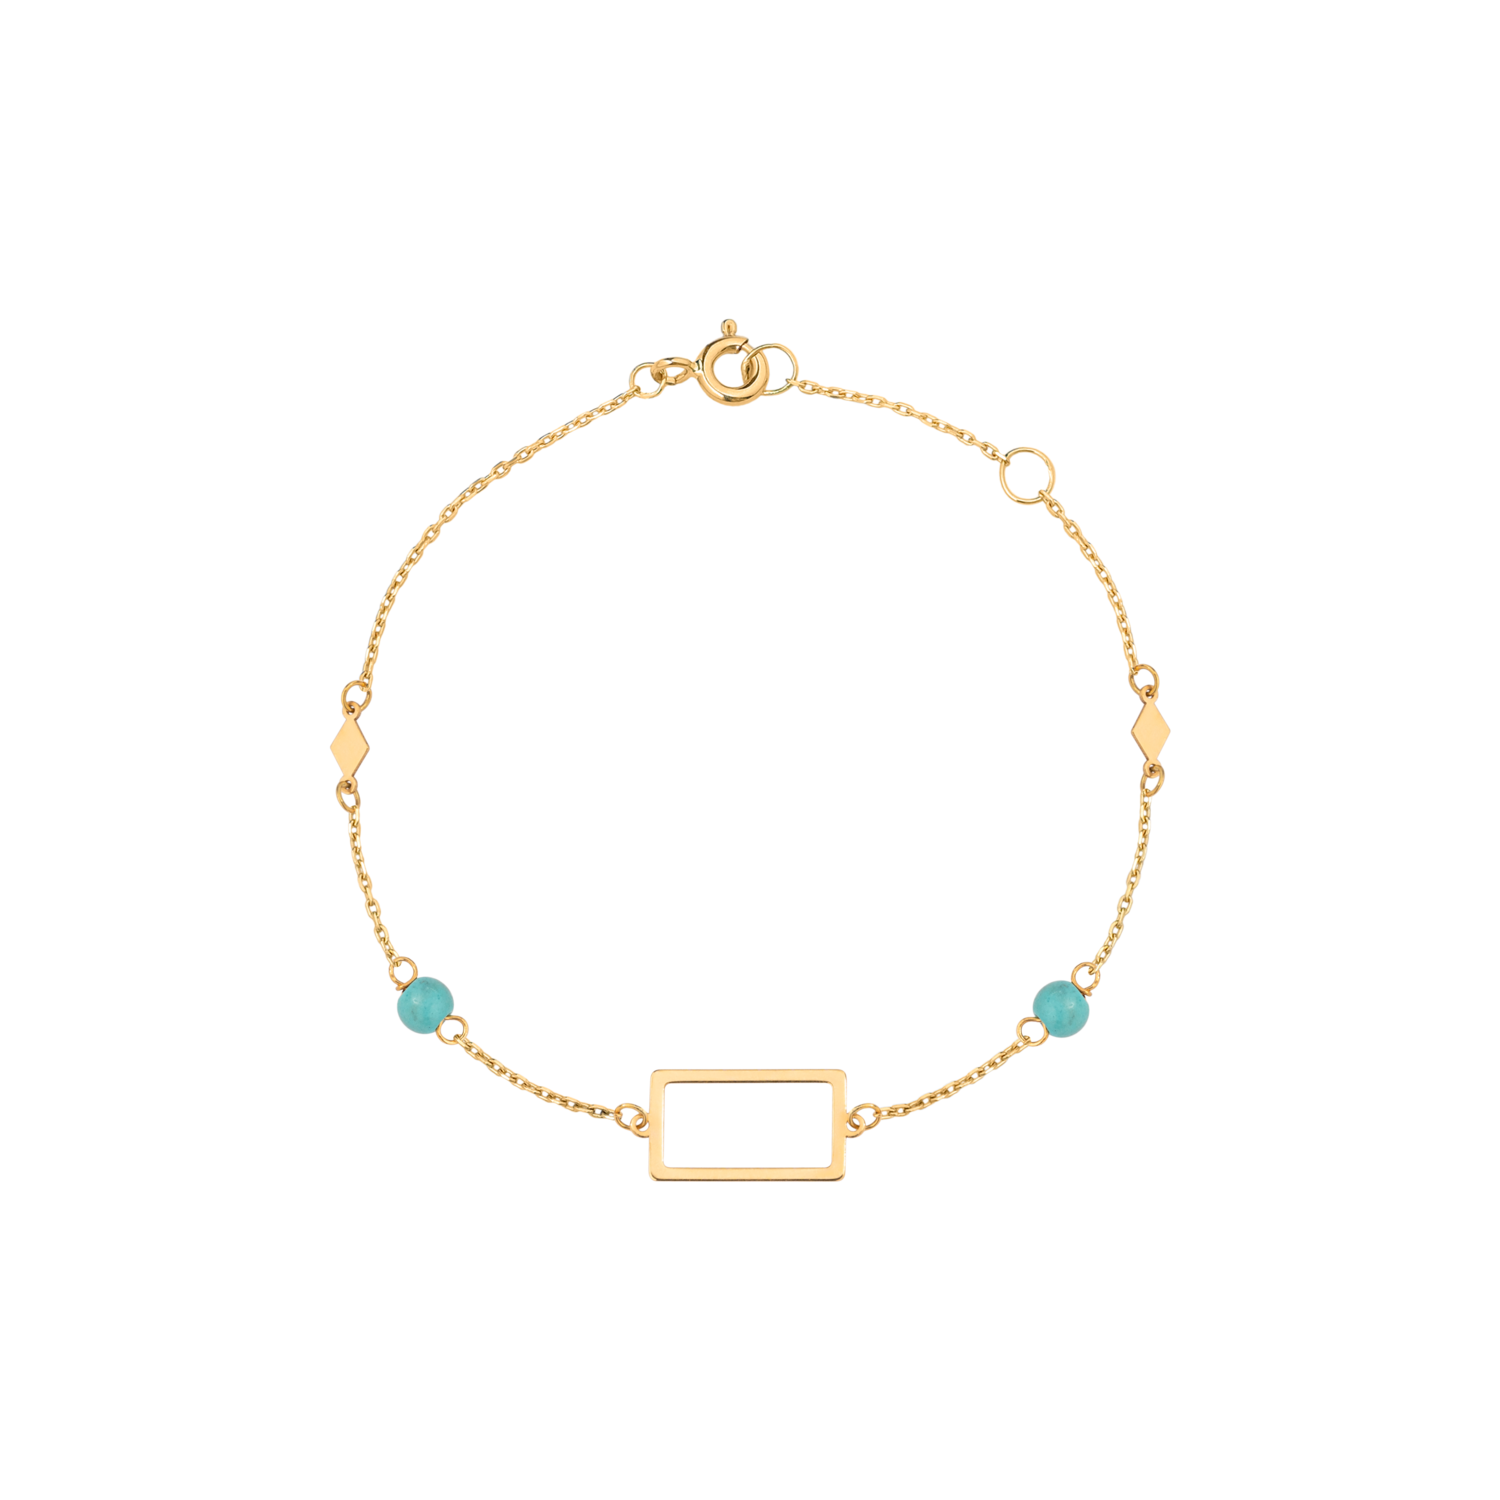 Eternal Gold Bracelet with Colored Stones